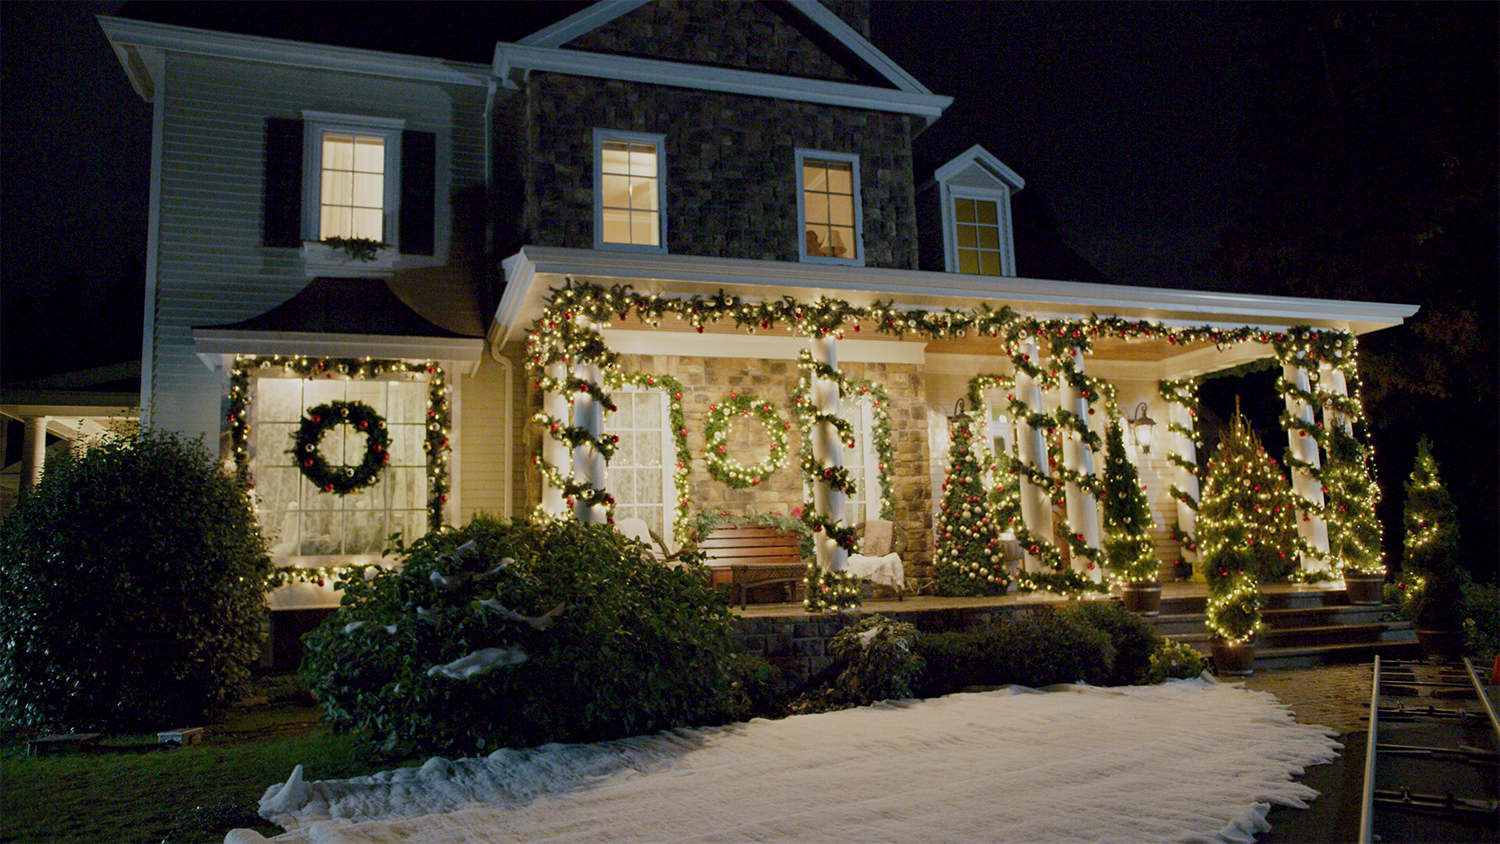 A house decorated for Christmas from the film A Dickens of a Holiday